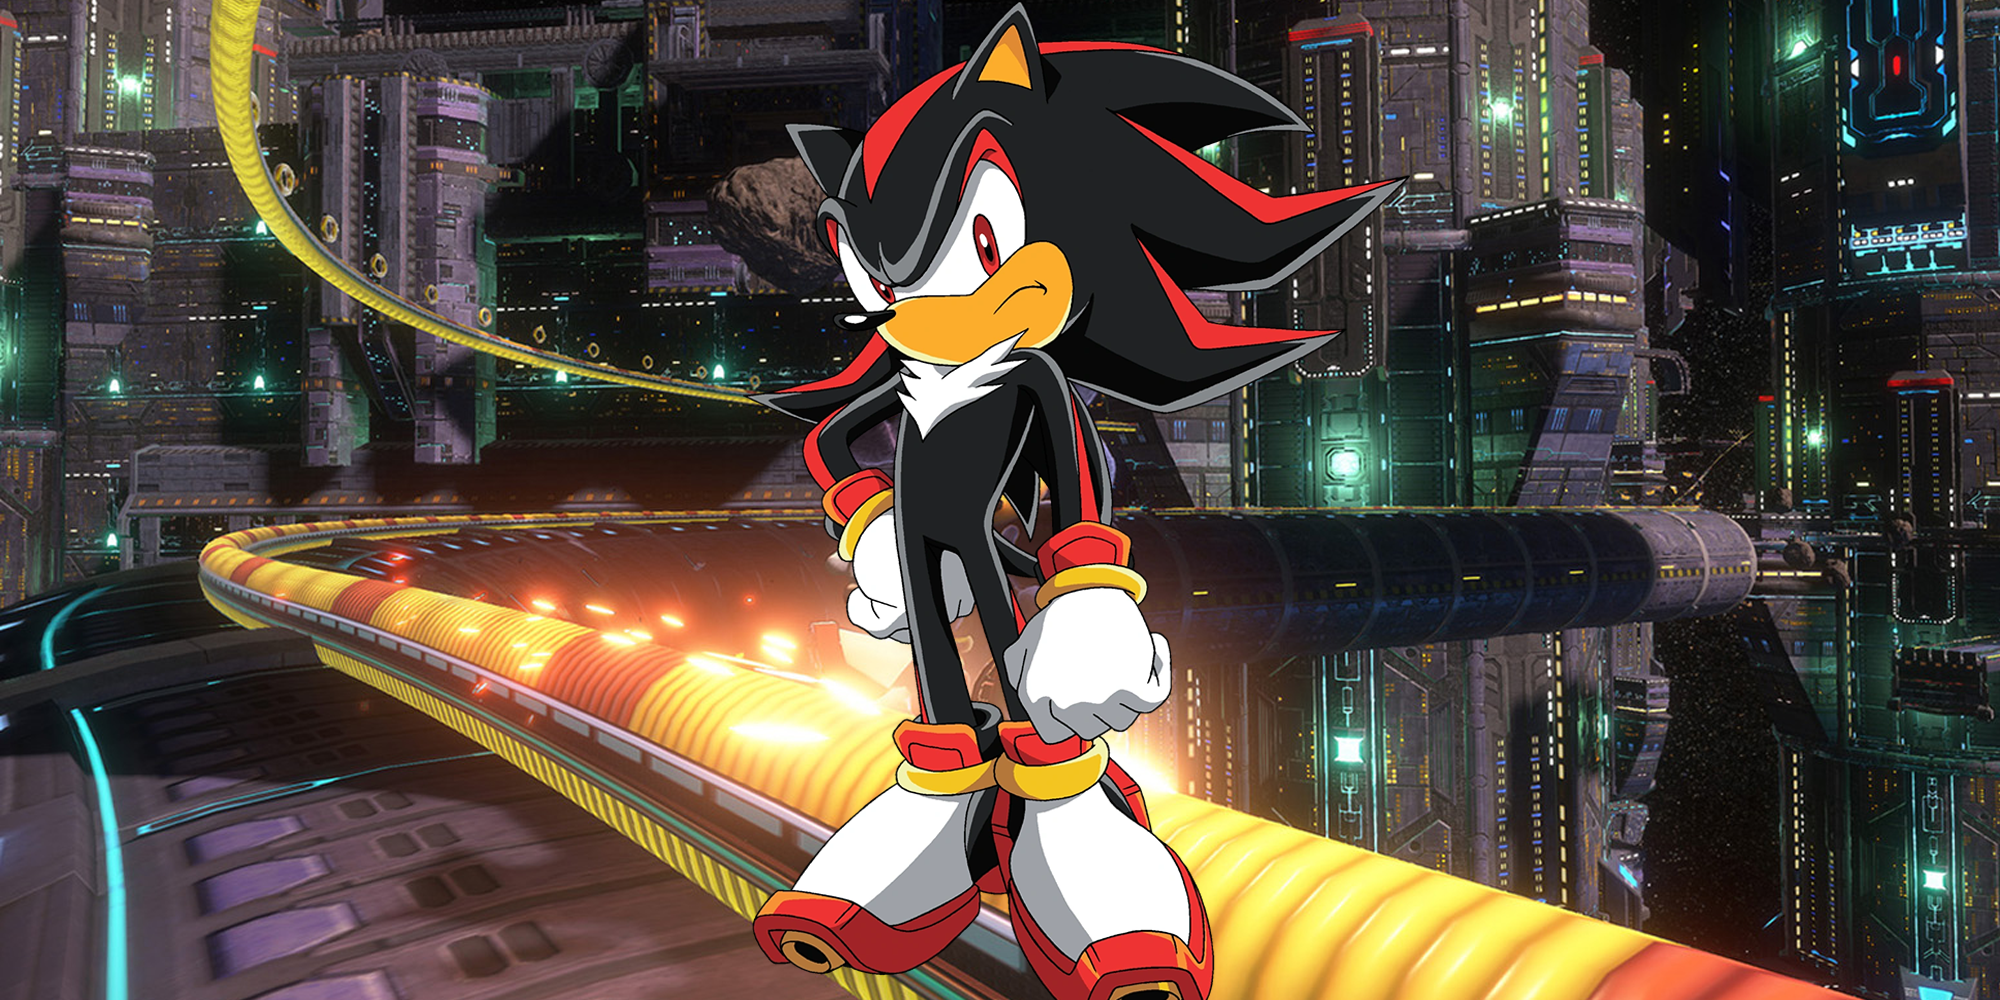 Shadow the Hedgehog official art from Sonic X